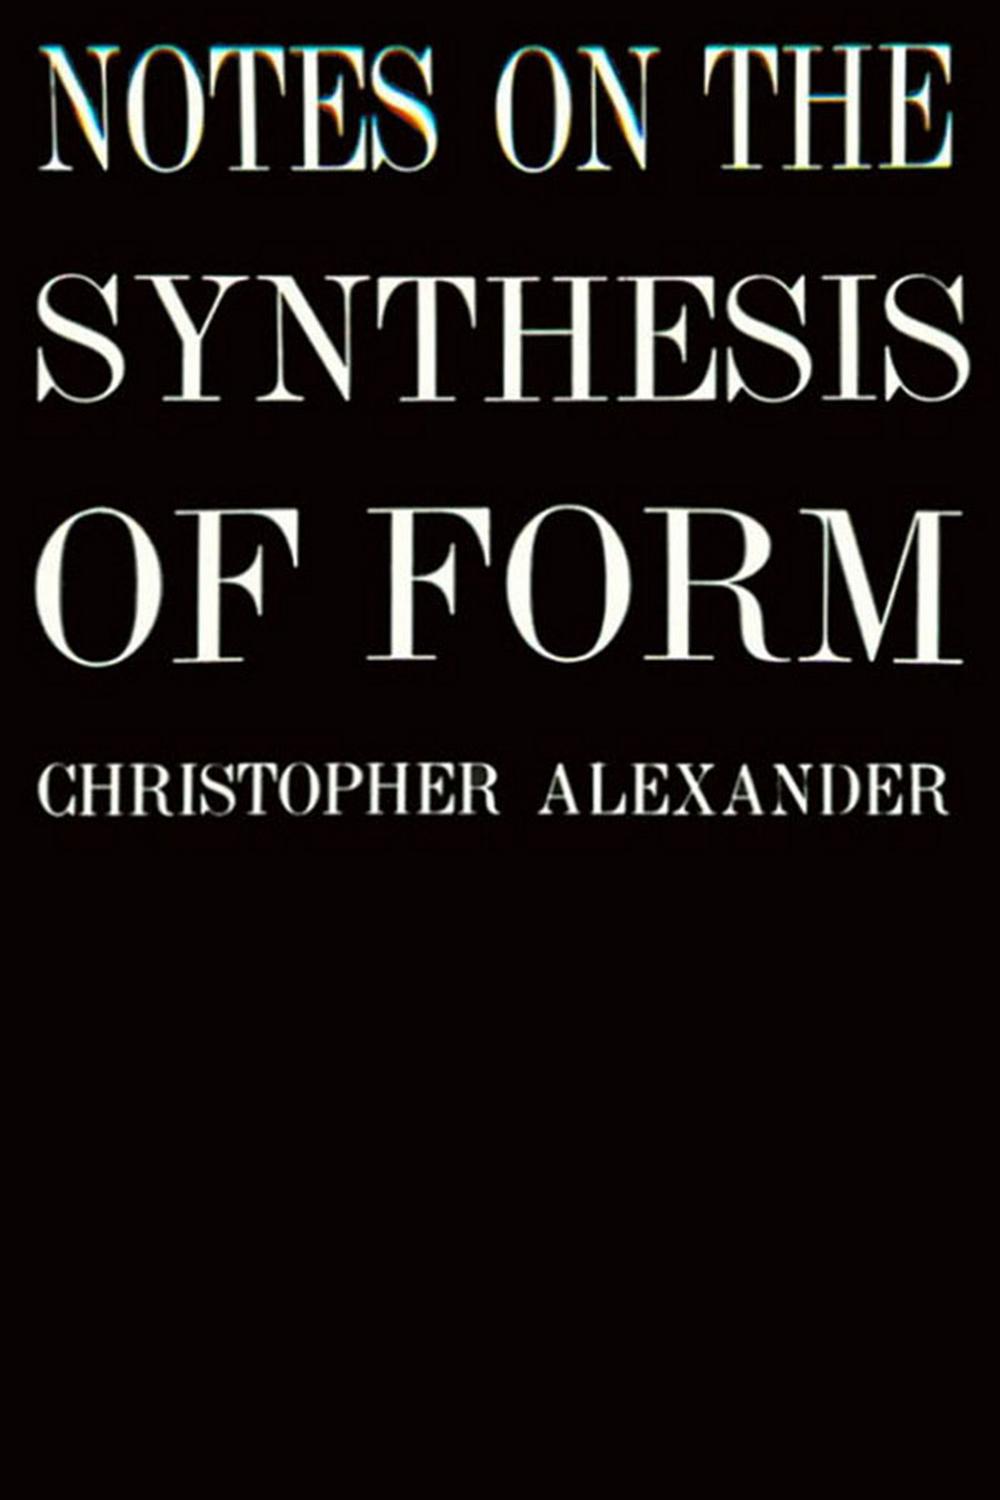 Notes on the Synthesis of Form - Christopher Alexander